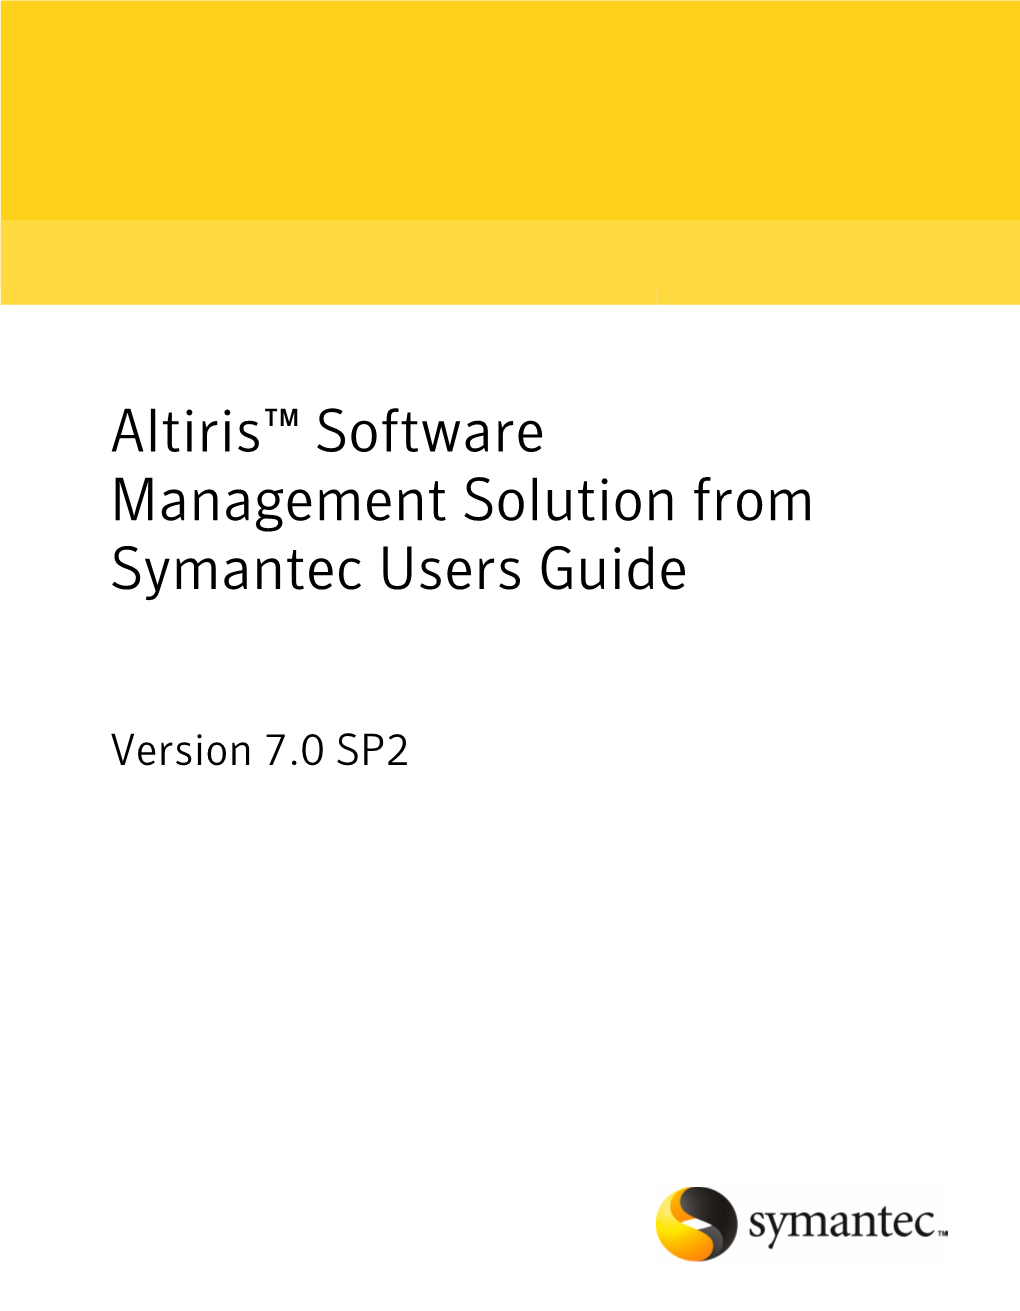 Altiris™ Software Management Solution from Symantec Users Guide